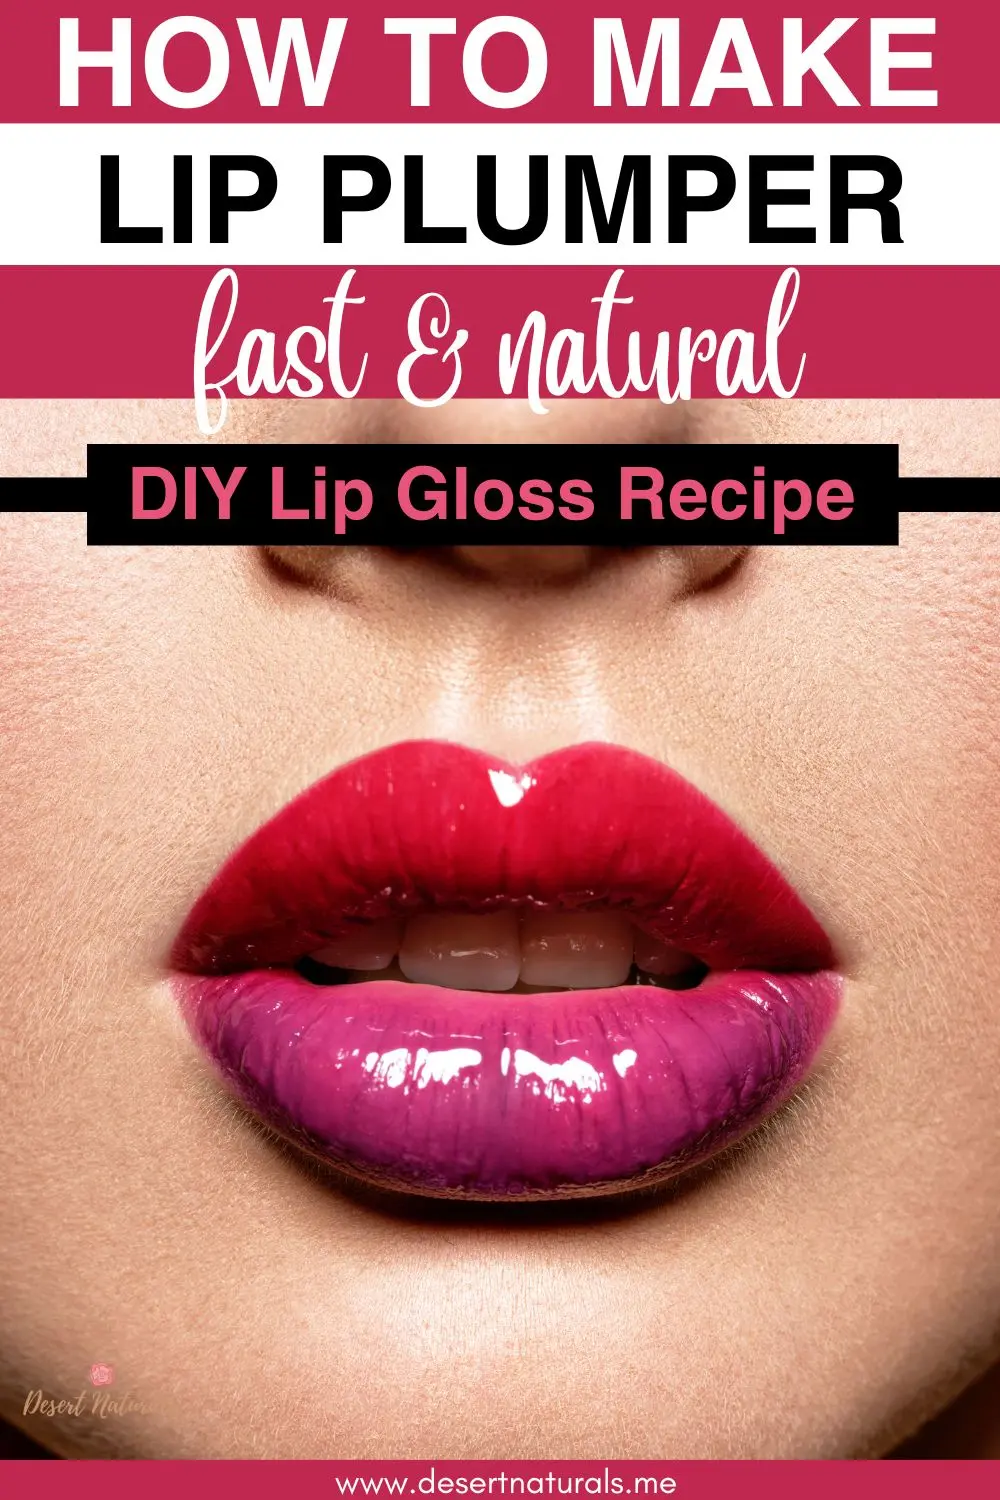 womans lips with text for diy natural lip plumper recipe